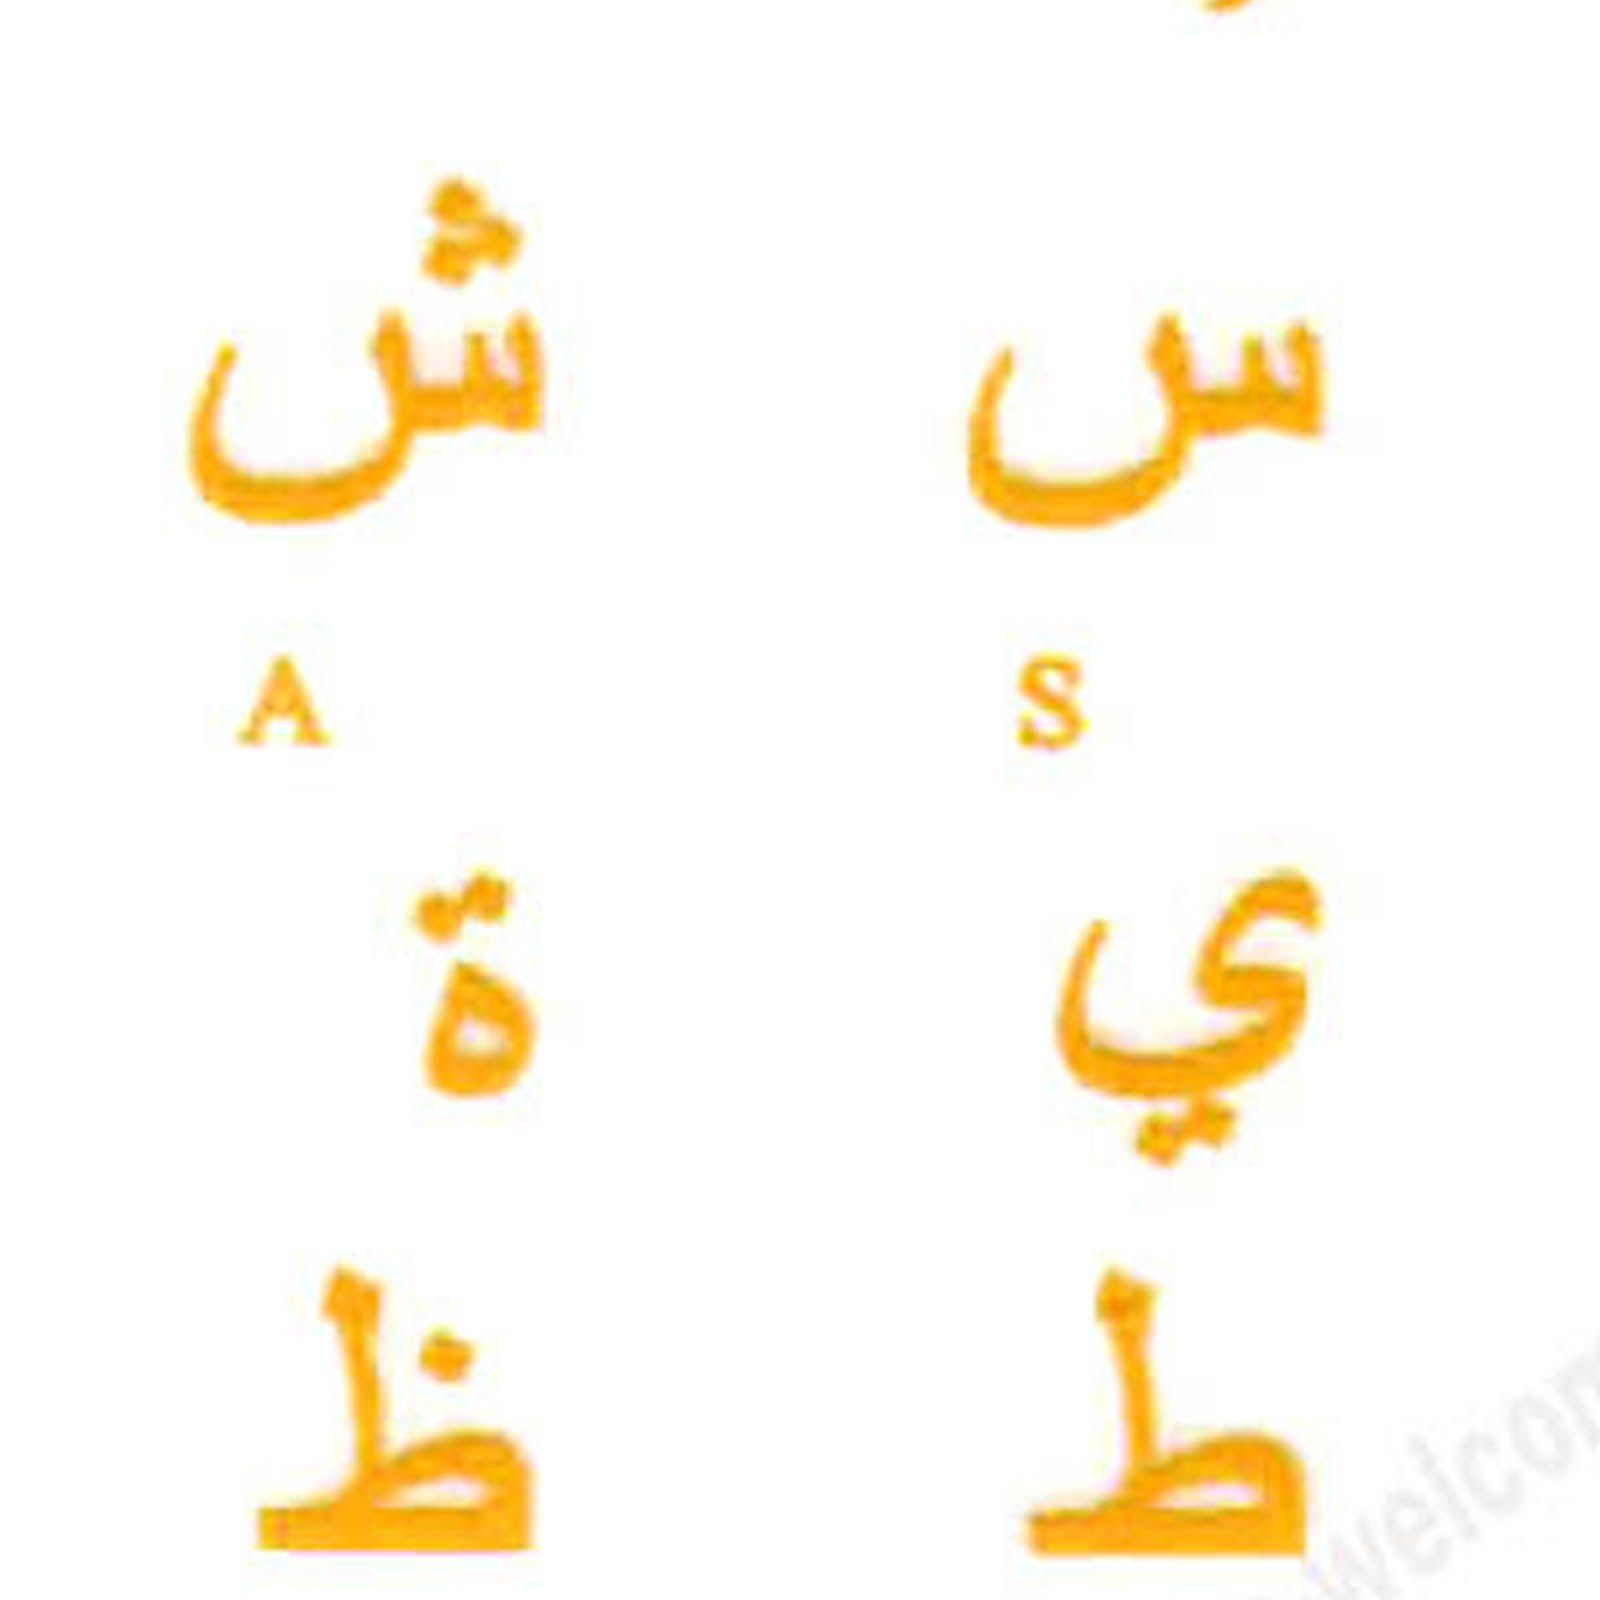 FARSI (PERSIAN) STICKERS YELLOW LETTERS TRANSPARENT BACKGROUND